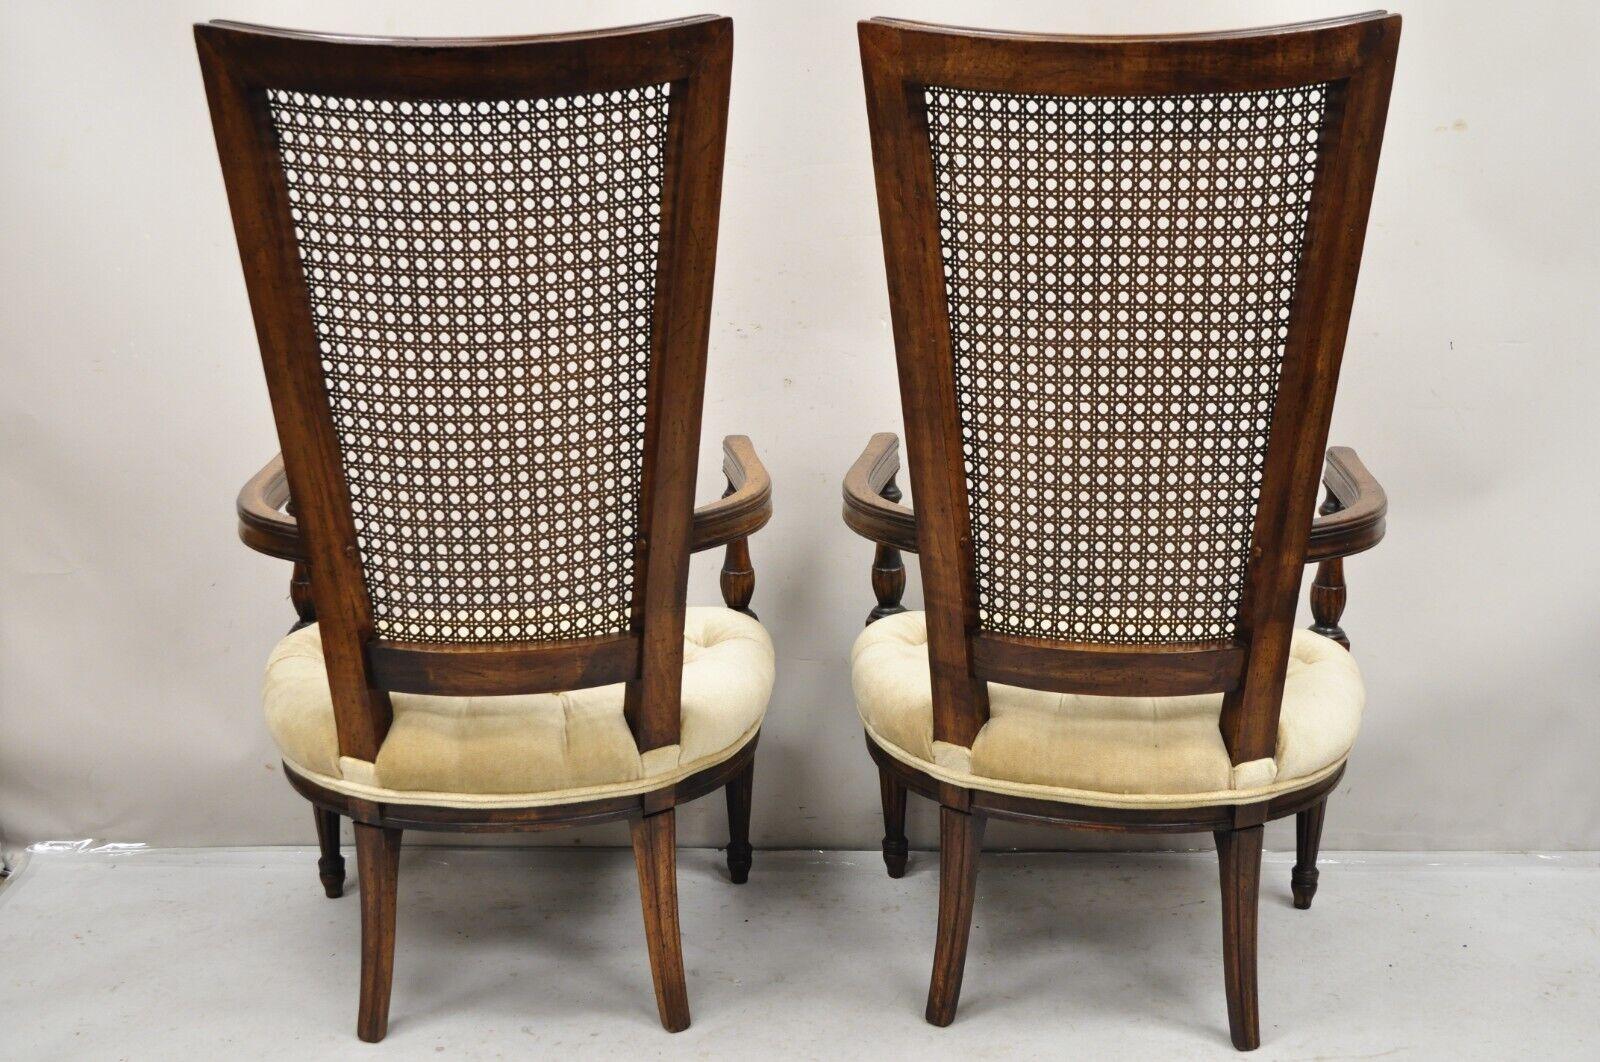 Vintage Hollywood Regency Tall Cane Back Fireside Lounge Armchairs - a Pair For Sale 3